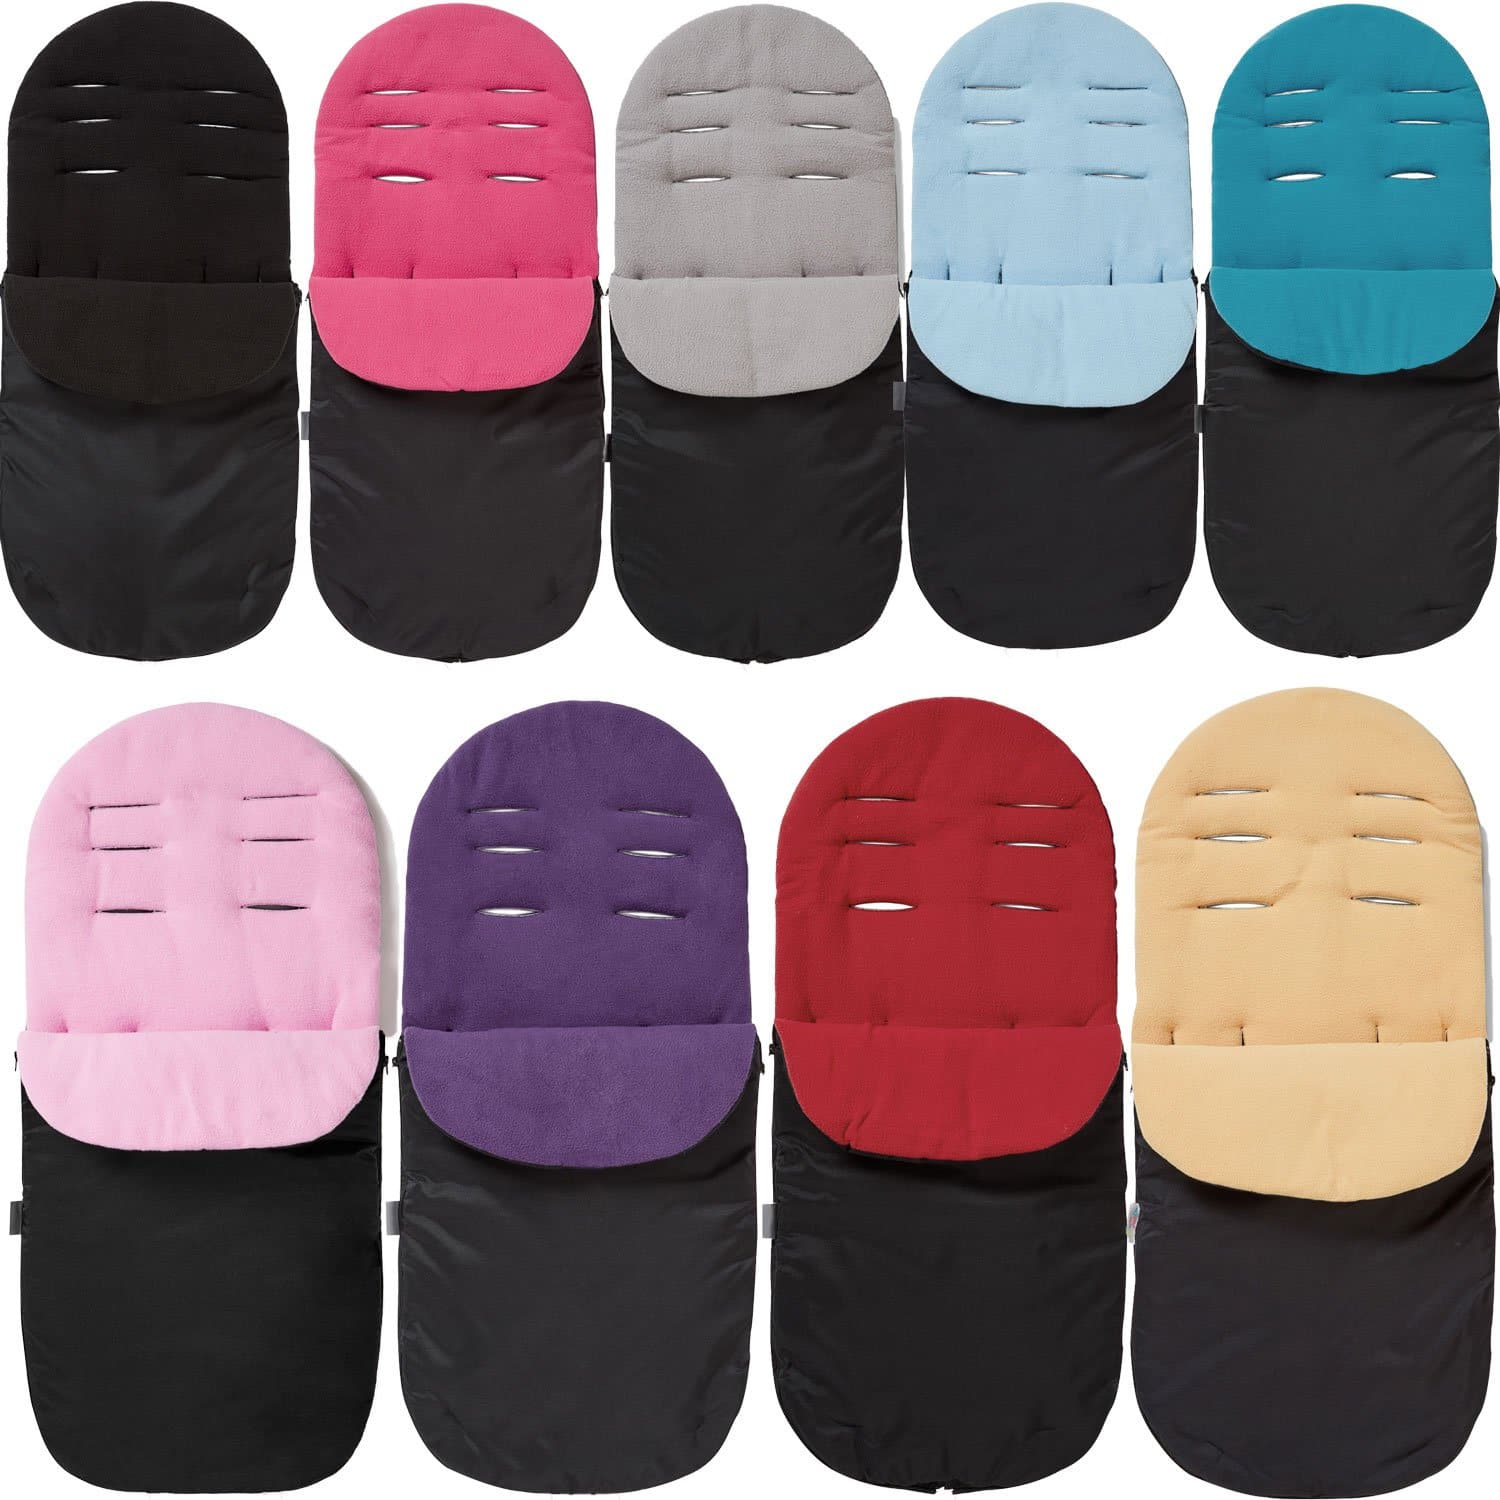 Footmuff / Cosy Toes Compatible with Babylo - For Your Little One